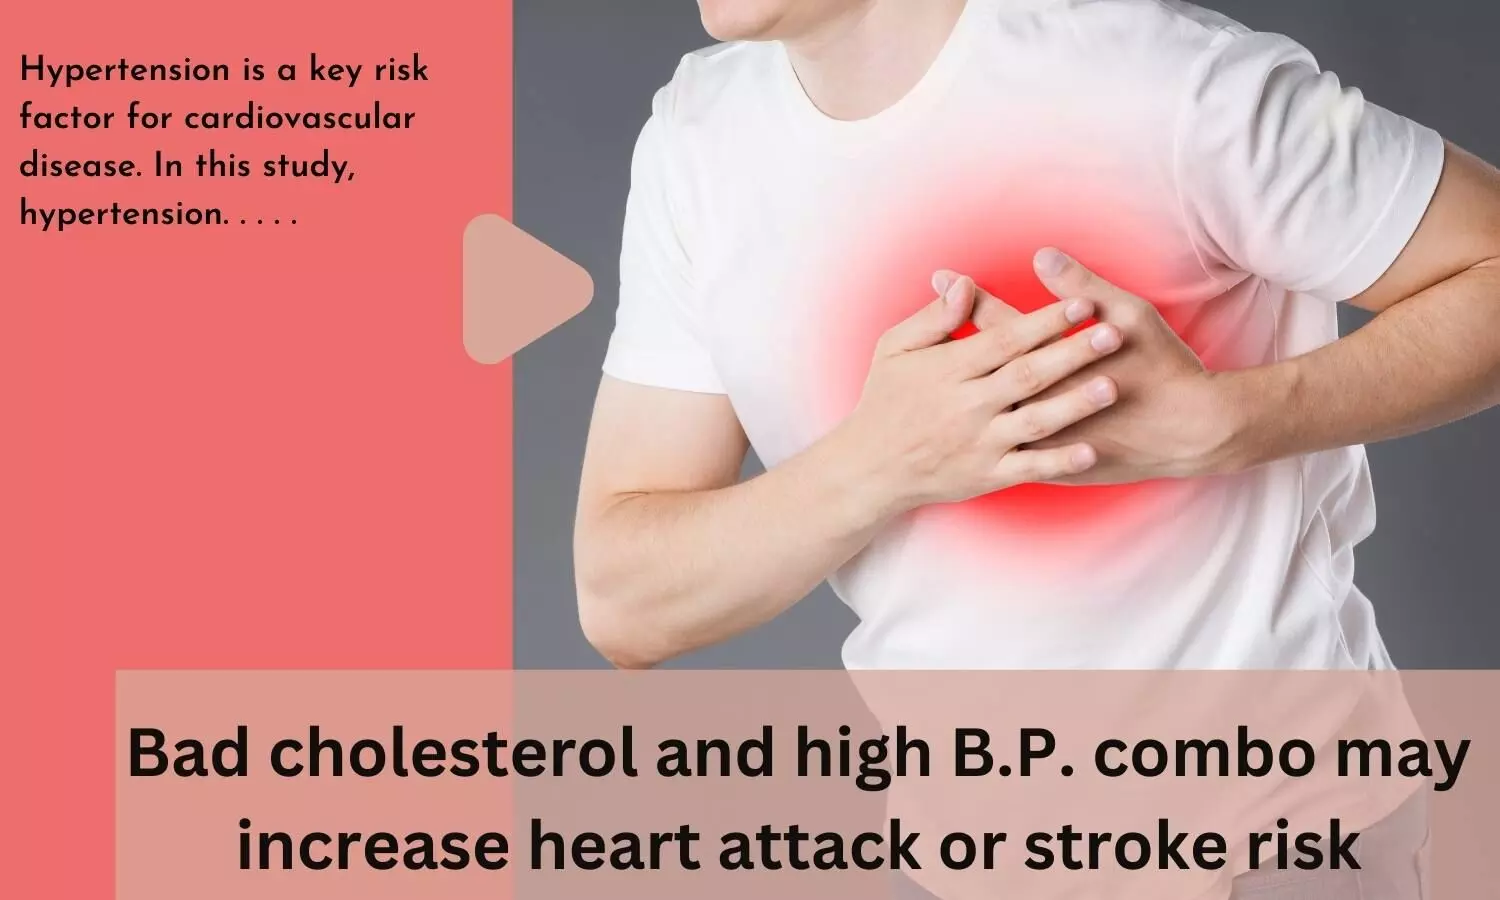 Bad cholesterol and high B.P. combo may increase heart attack or stroke risk